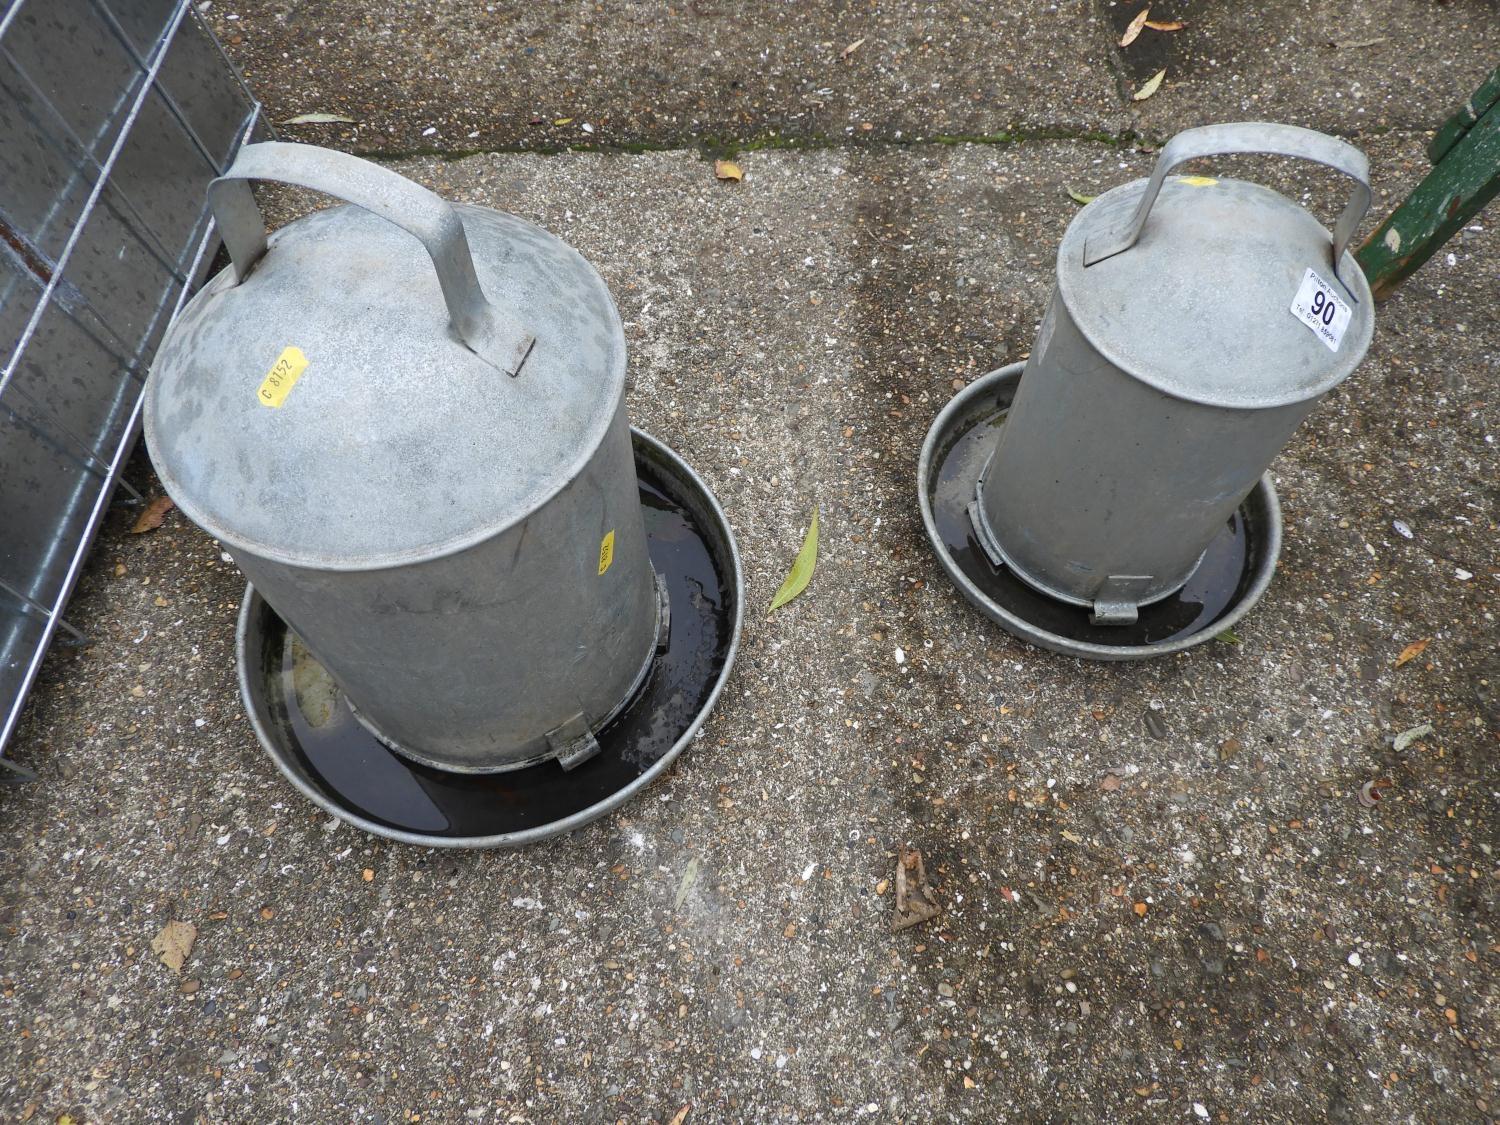 2x Poultry Feeders